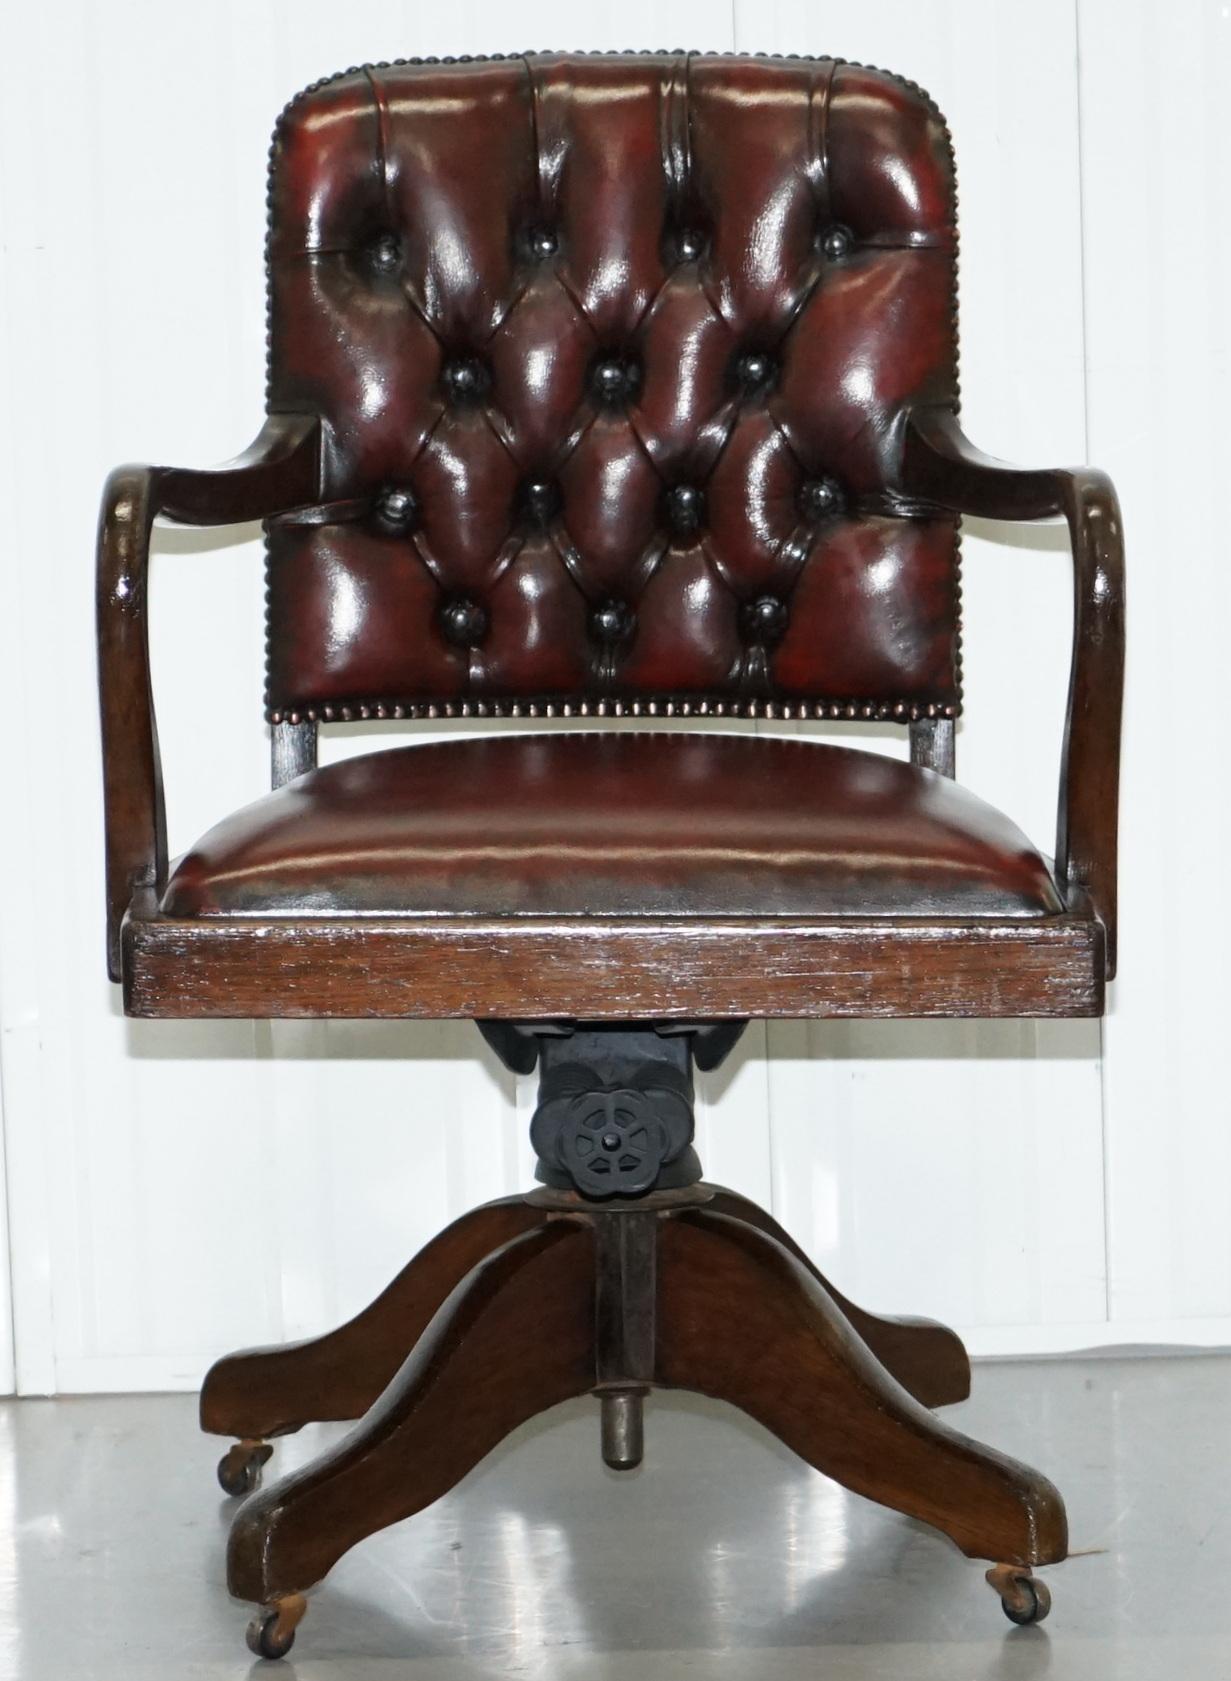 We are delighted to offer for sale this lovely period Edwardian Solid oak frame office captains chair with Chesterfield

A very good looking early piece, it has new leather upholstery which has been hand dyed this deep oxblood colour, the frame